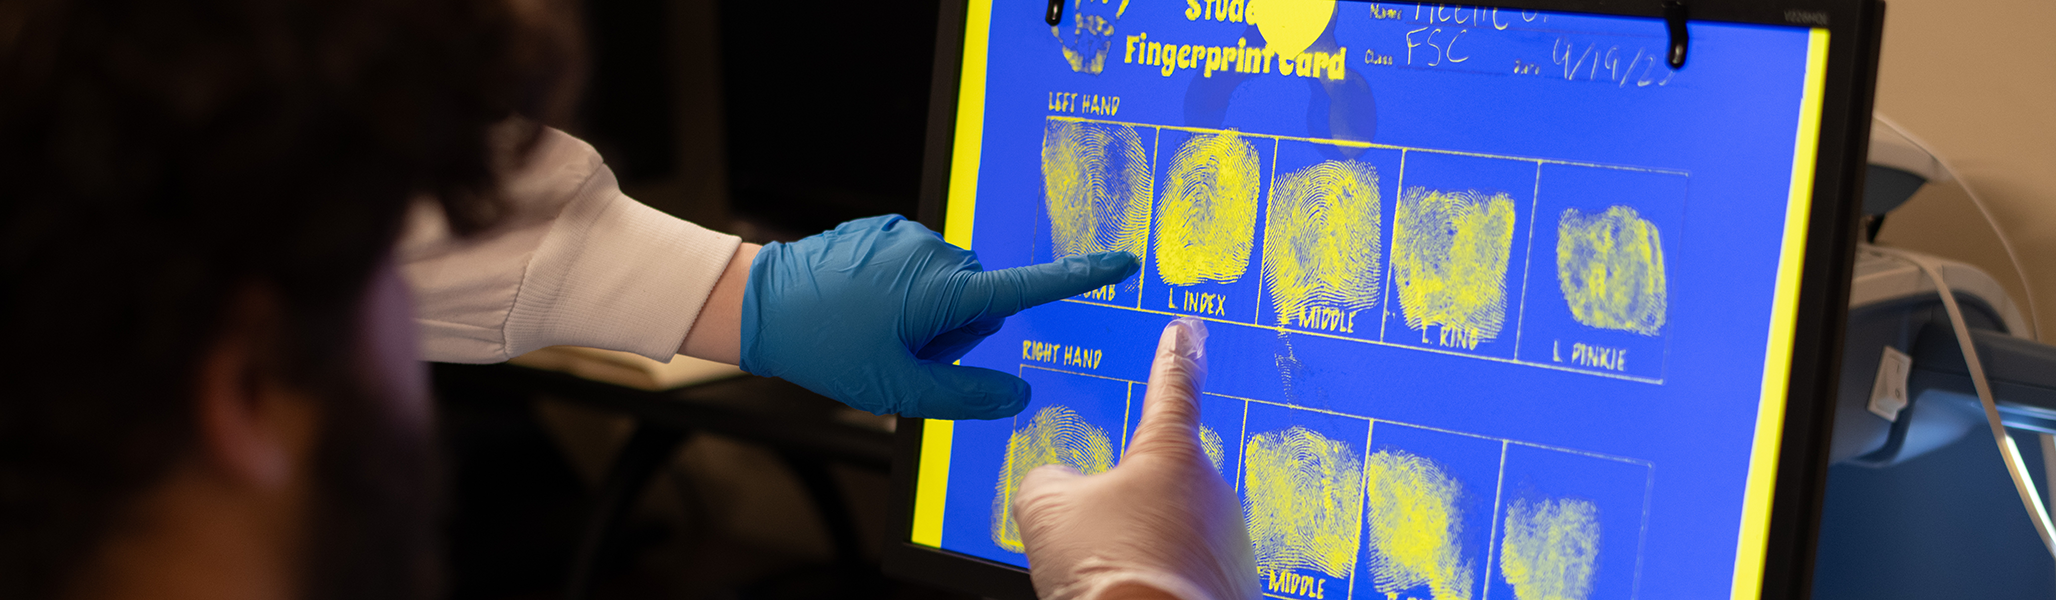 Students review fingerprints in the forensic science lab